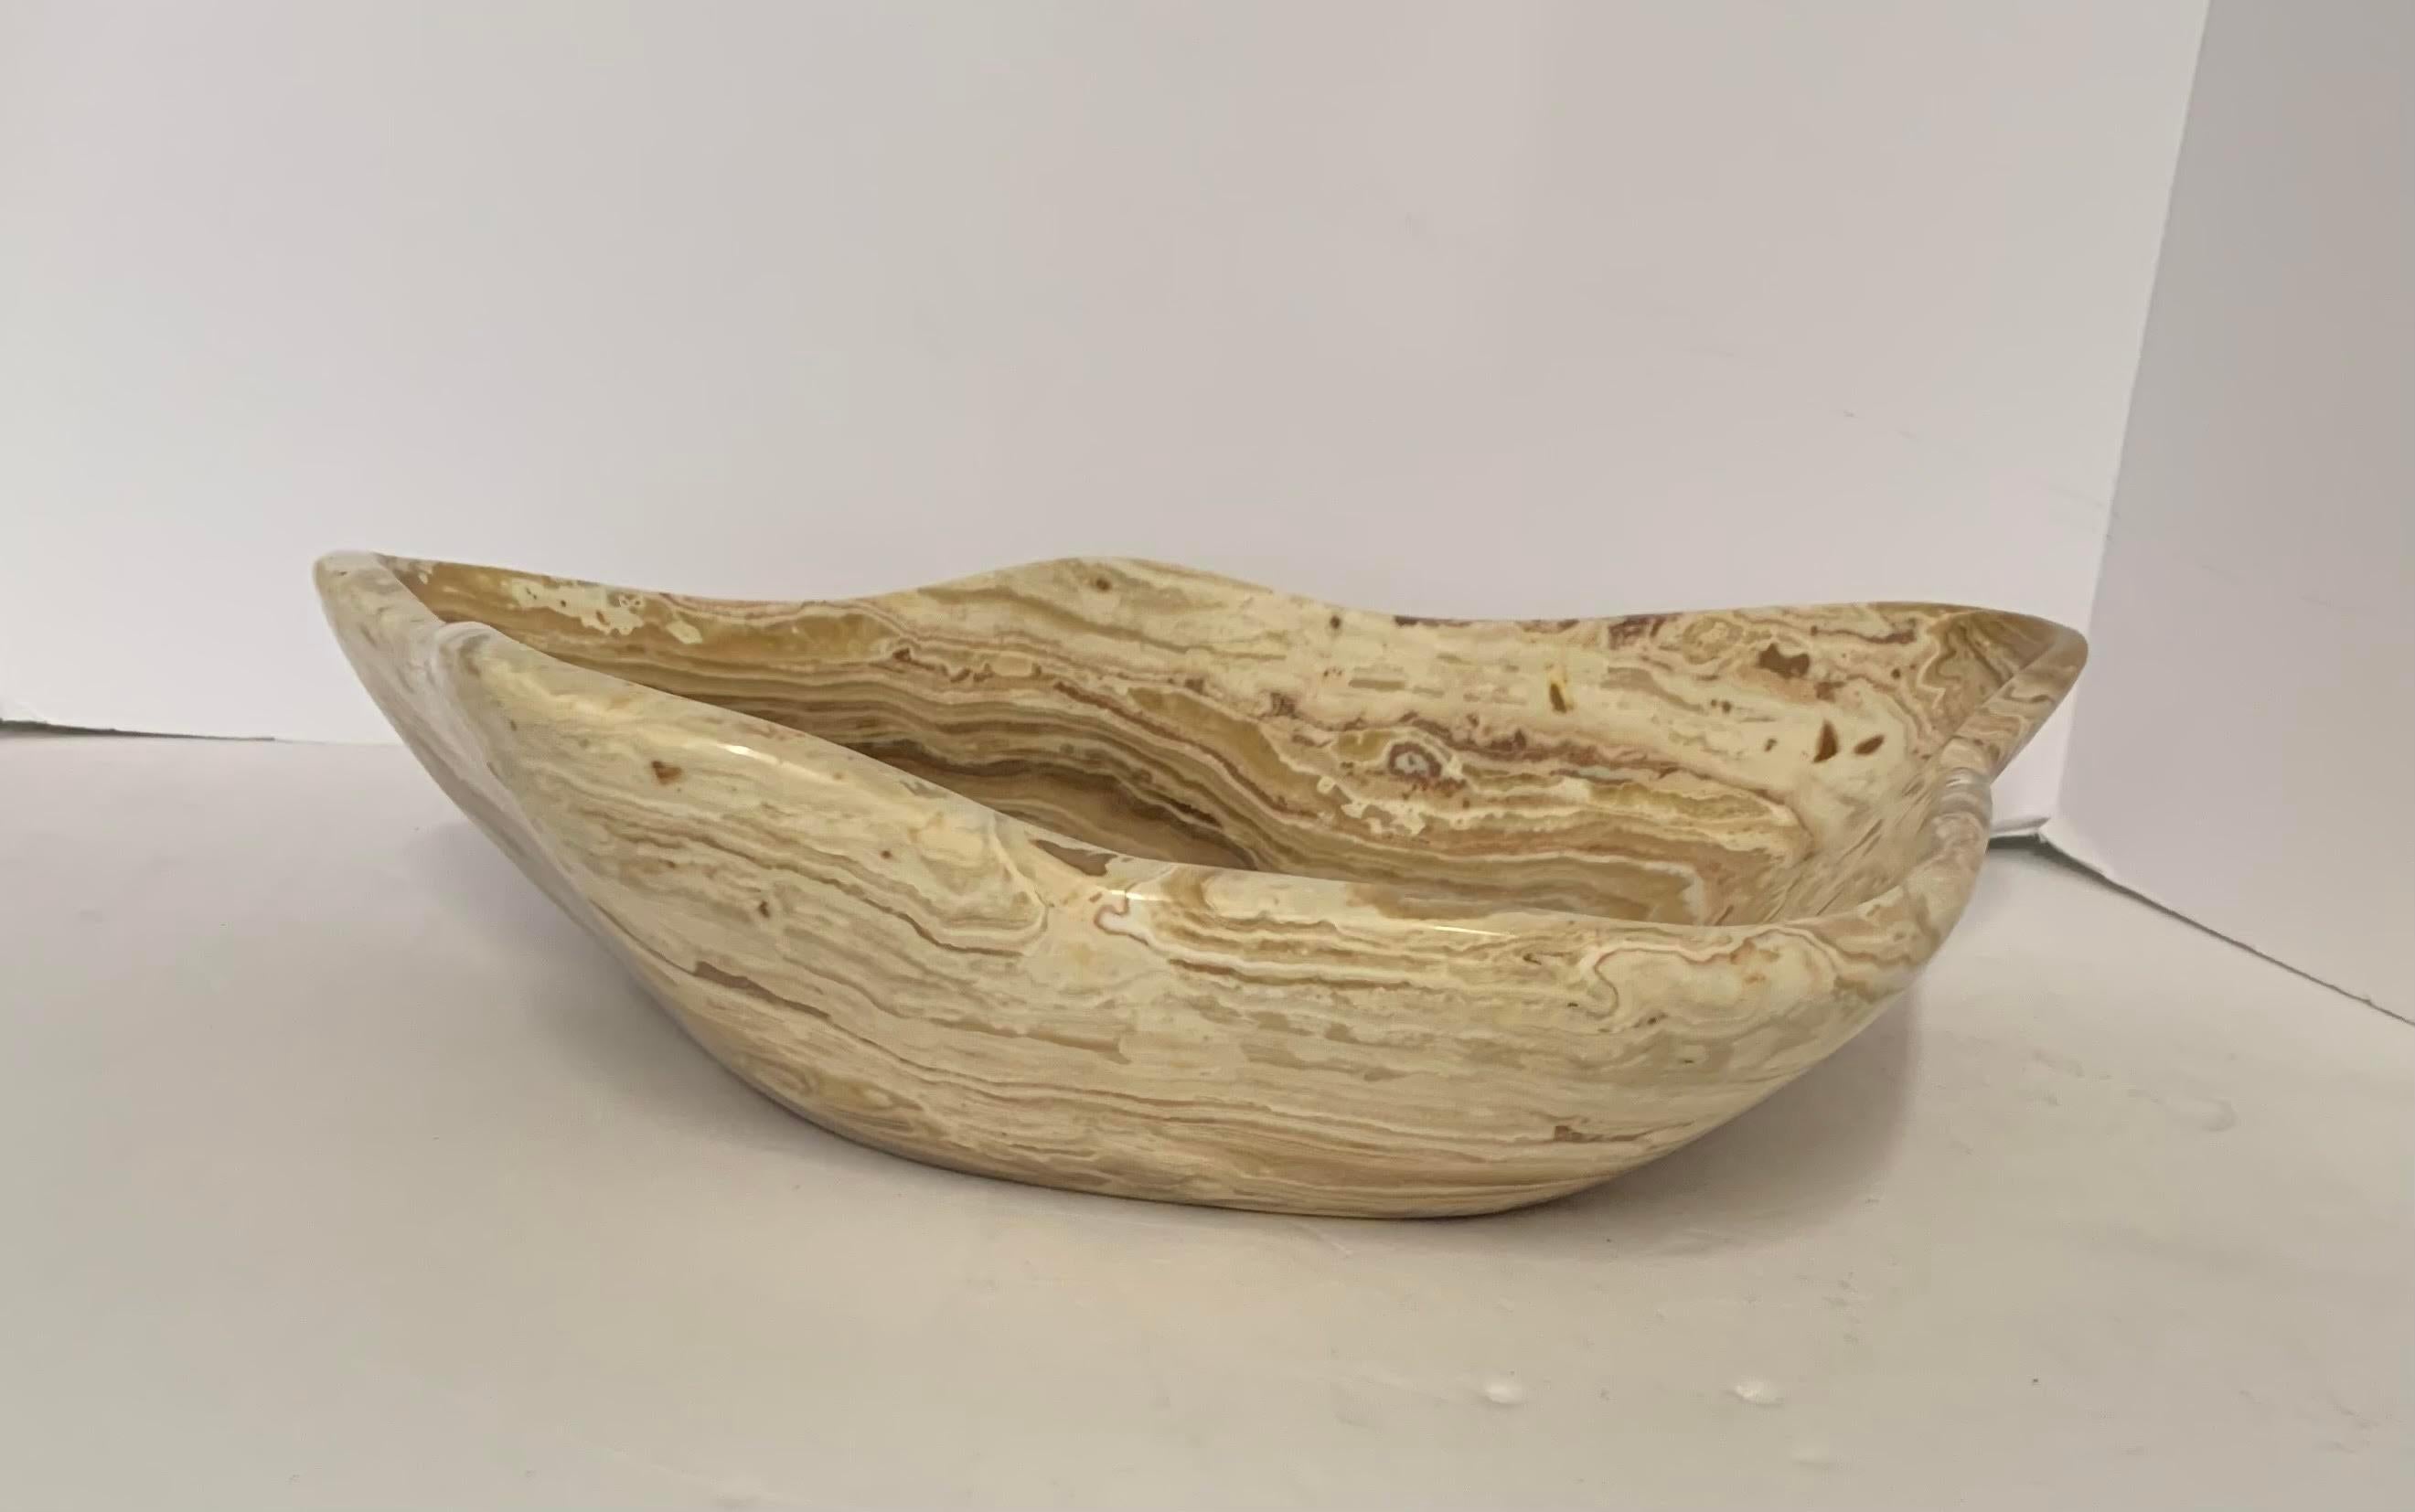 Contemporary Moroccan free form shaped onyx bowl.
Tan and cream in color.
From a large collection of different shapes, sizes and colors.